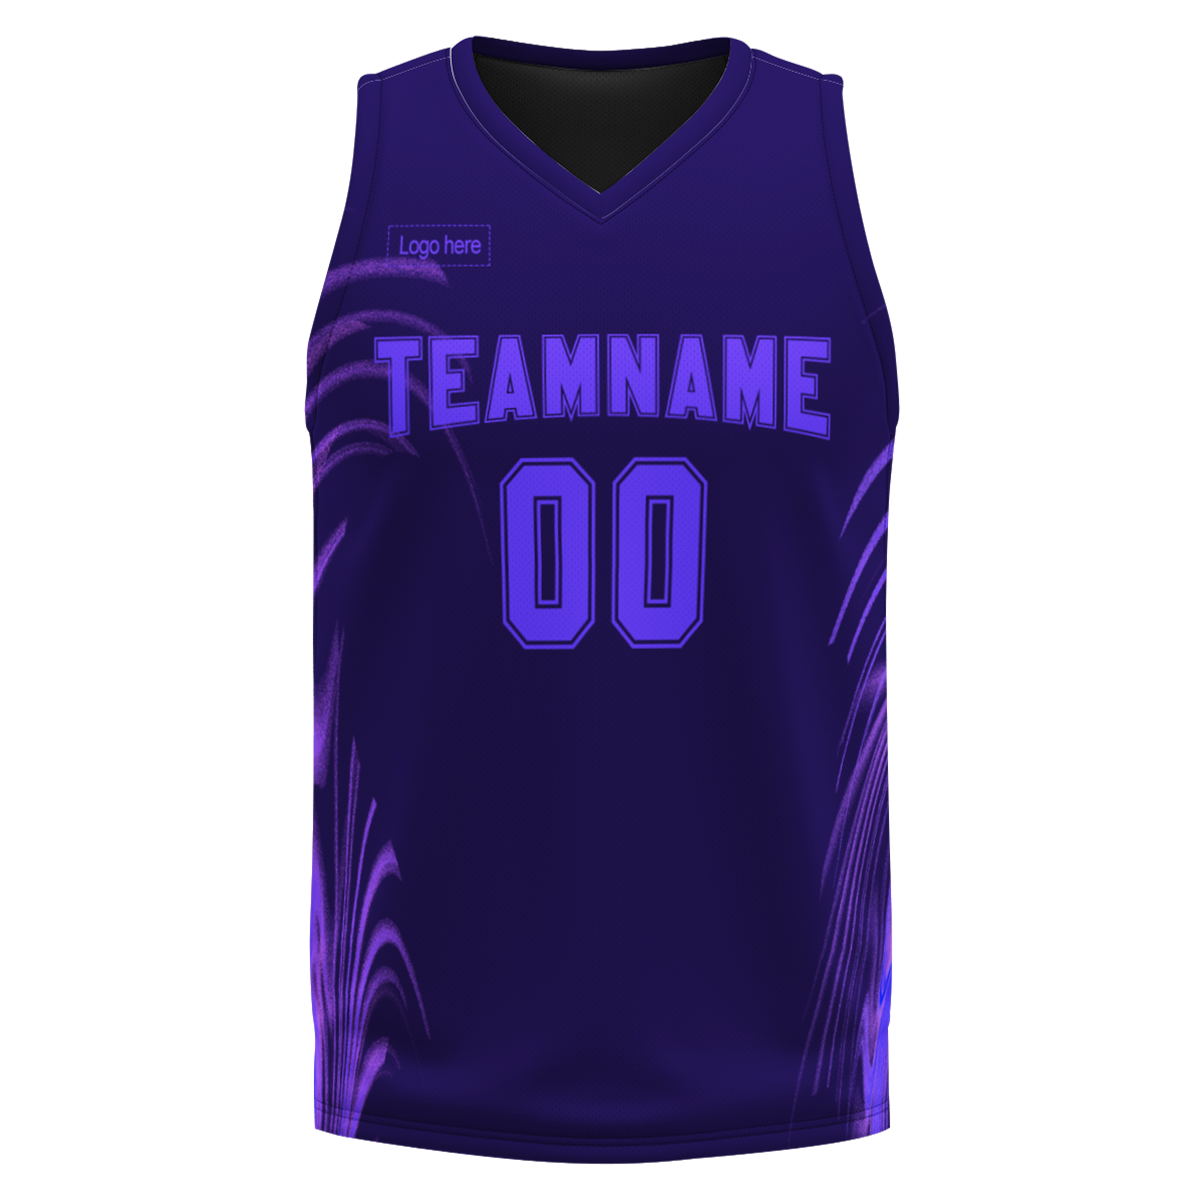 wholesale-polyester-breathable-sublimation-multiple-design-printed-basketball-jersey-uniforms-at-cj-pod-4